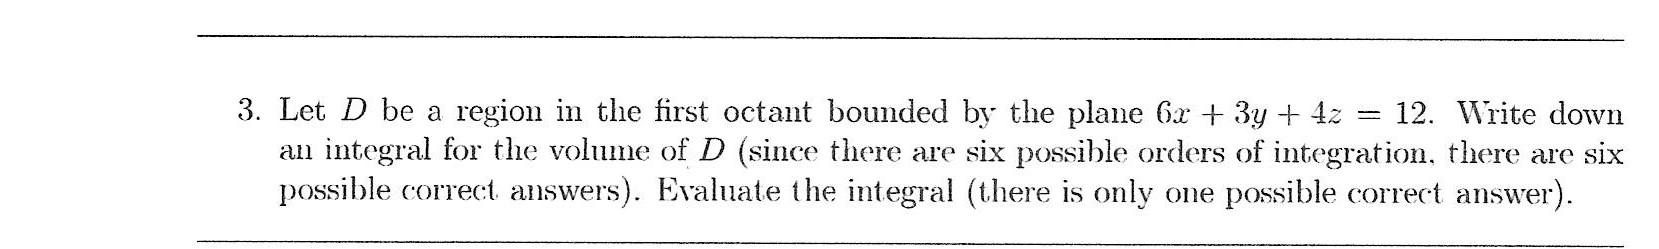 3. Let D be a region in the first octant bounded by the plane 6x + 3y + 4z = 12. Write down an integral for the volume of D (